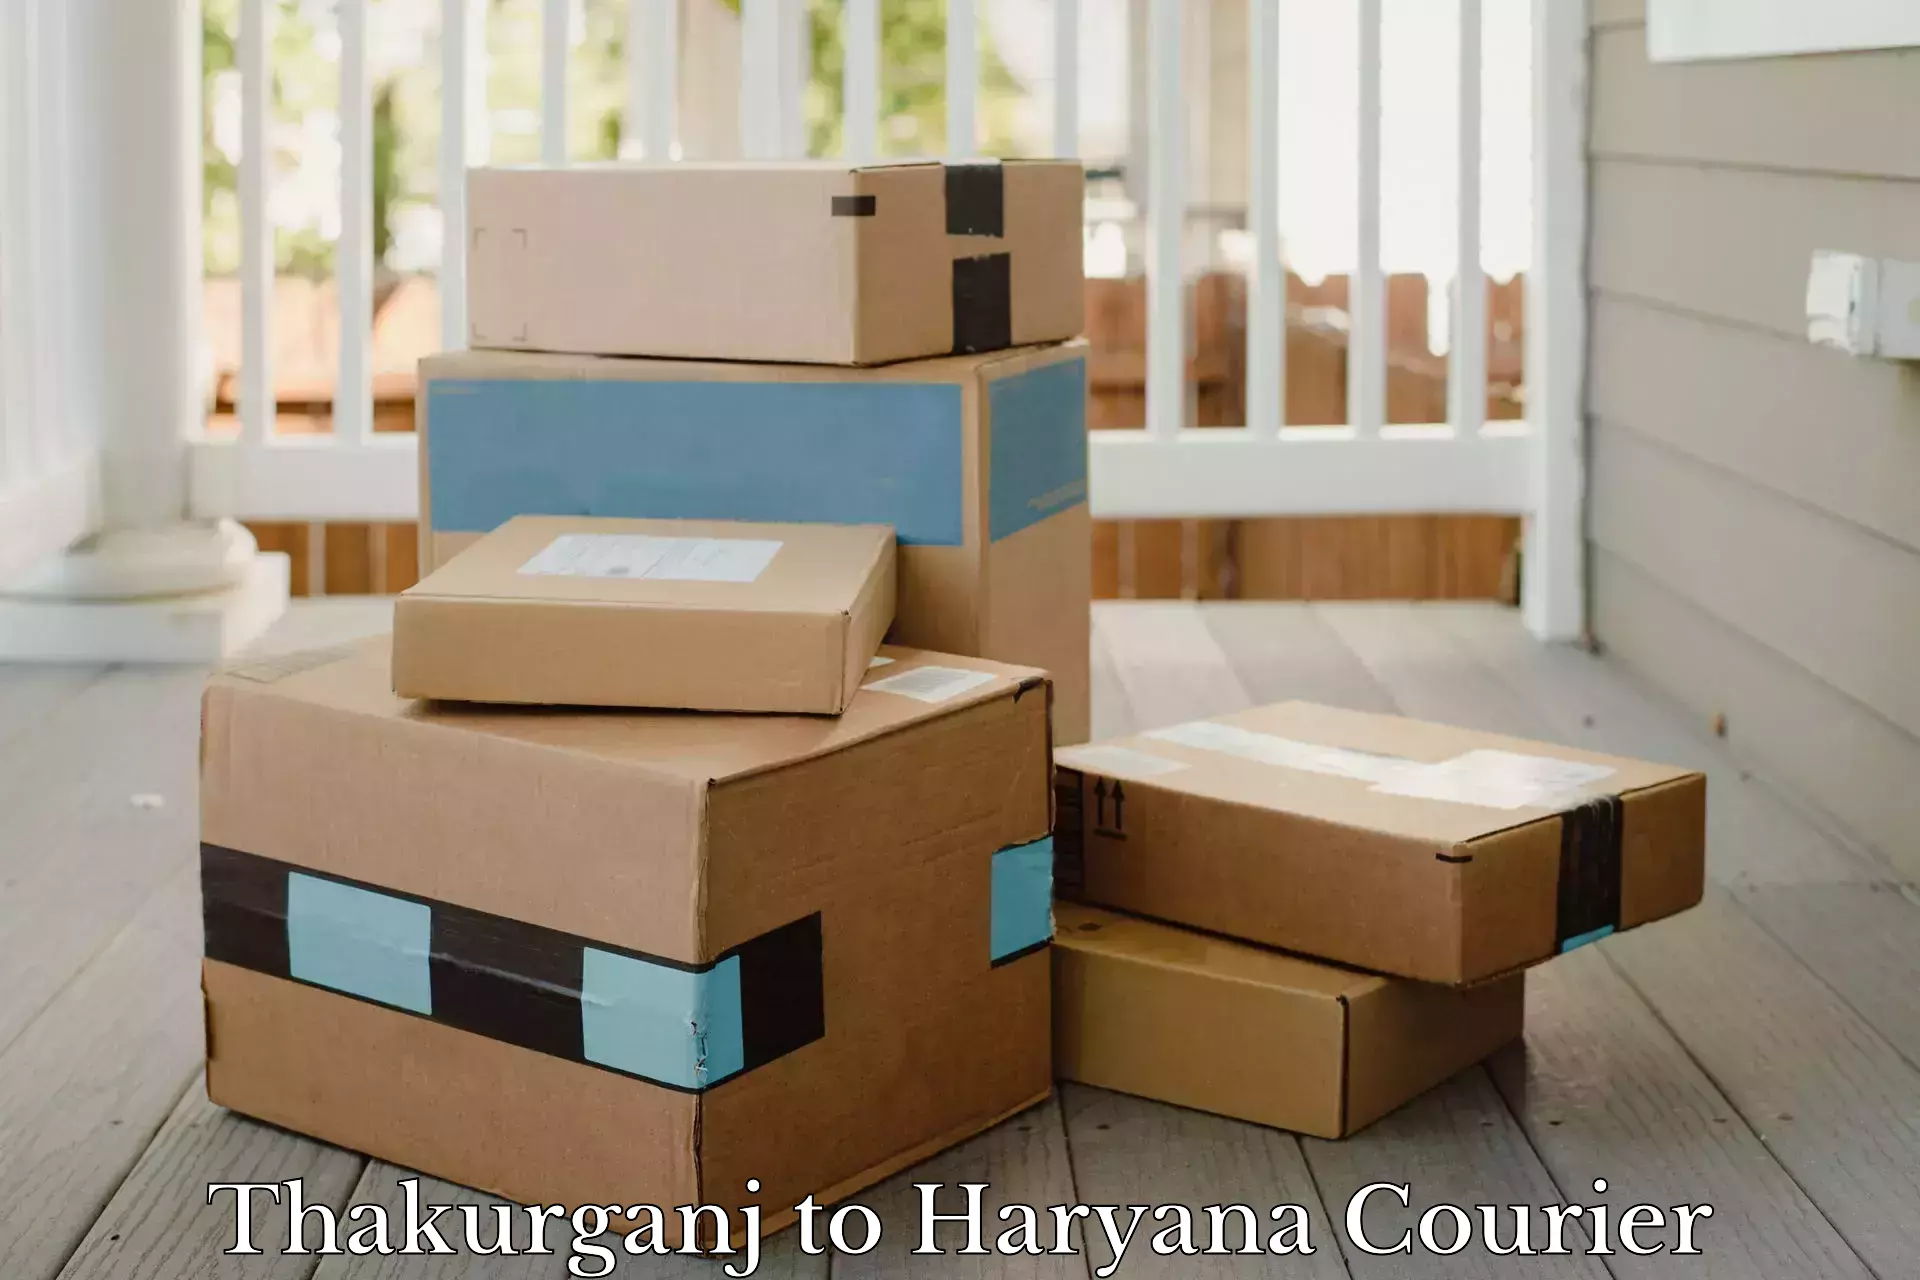 Discount courier rates in Thakurganj to NCR Haryana